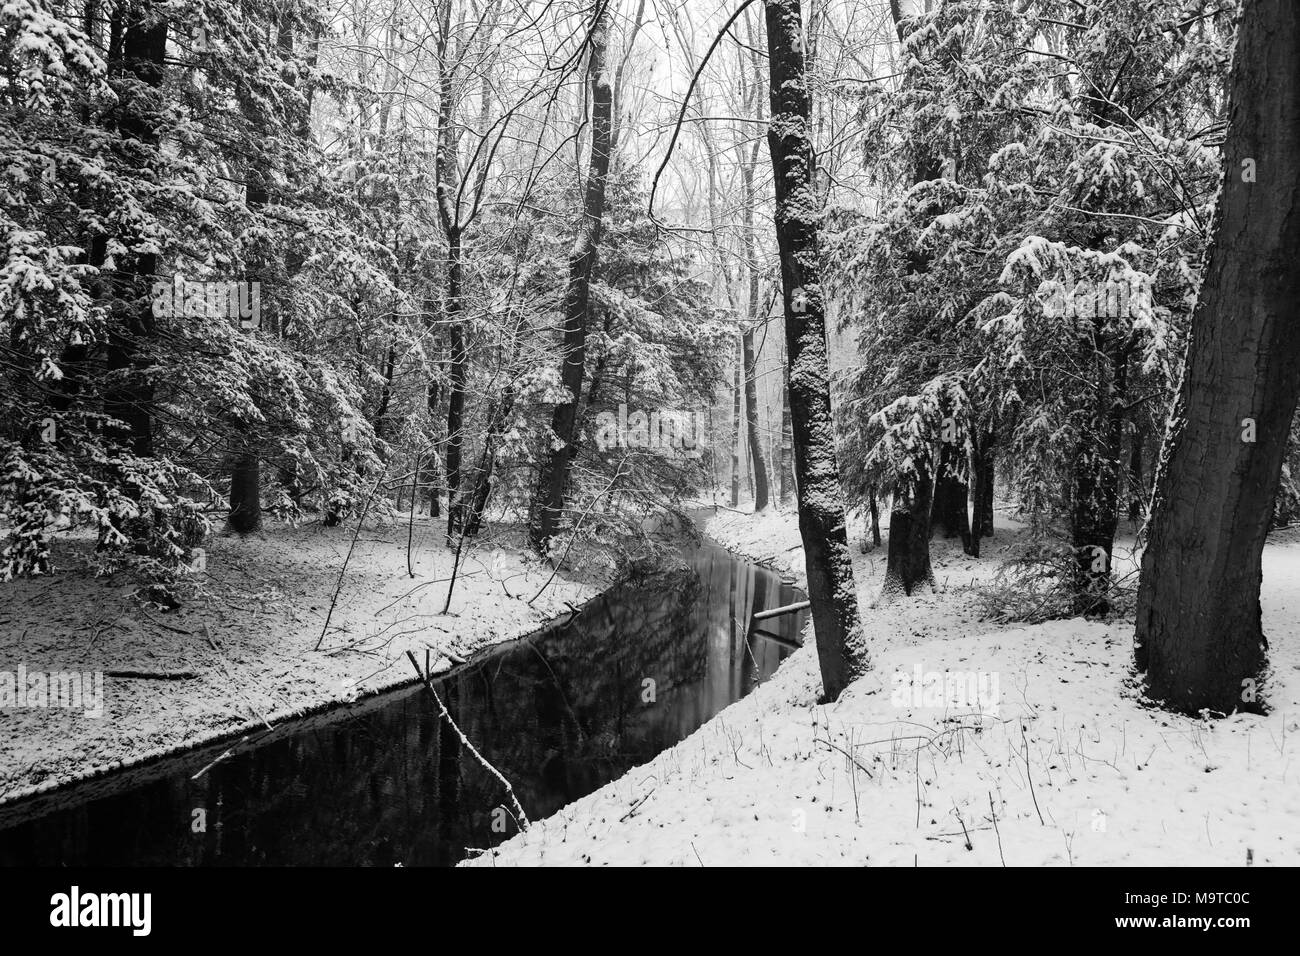 Reflections of trees in a ditch of the snowy Amsterdamse Bos. Stock Photo